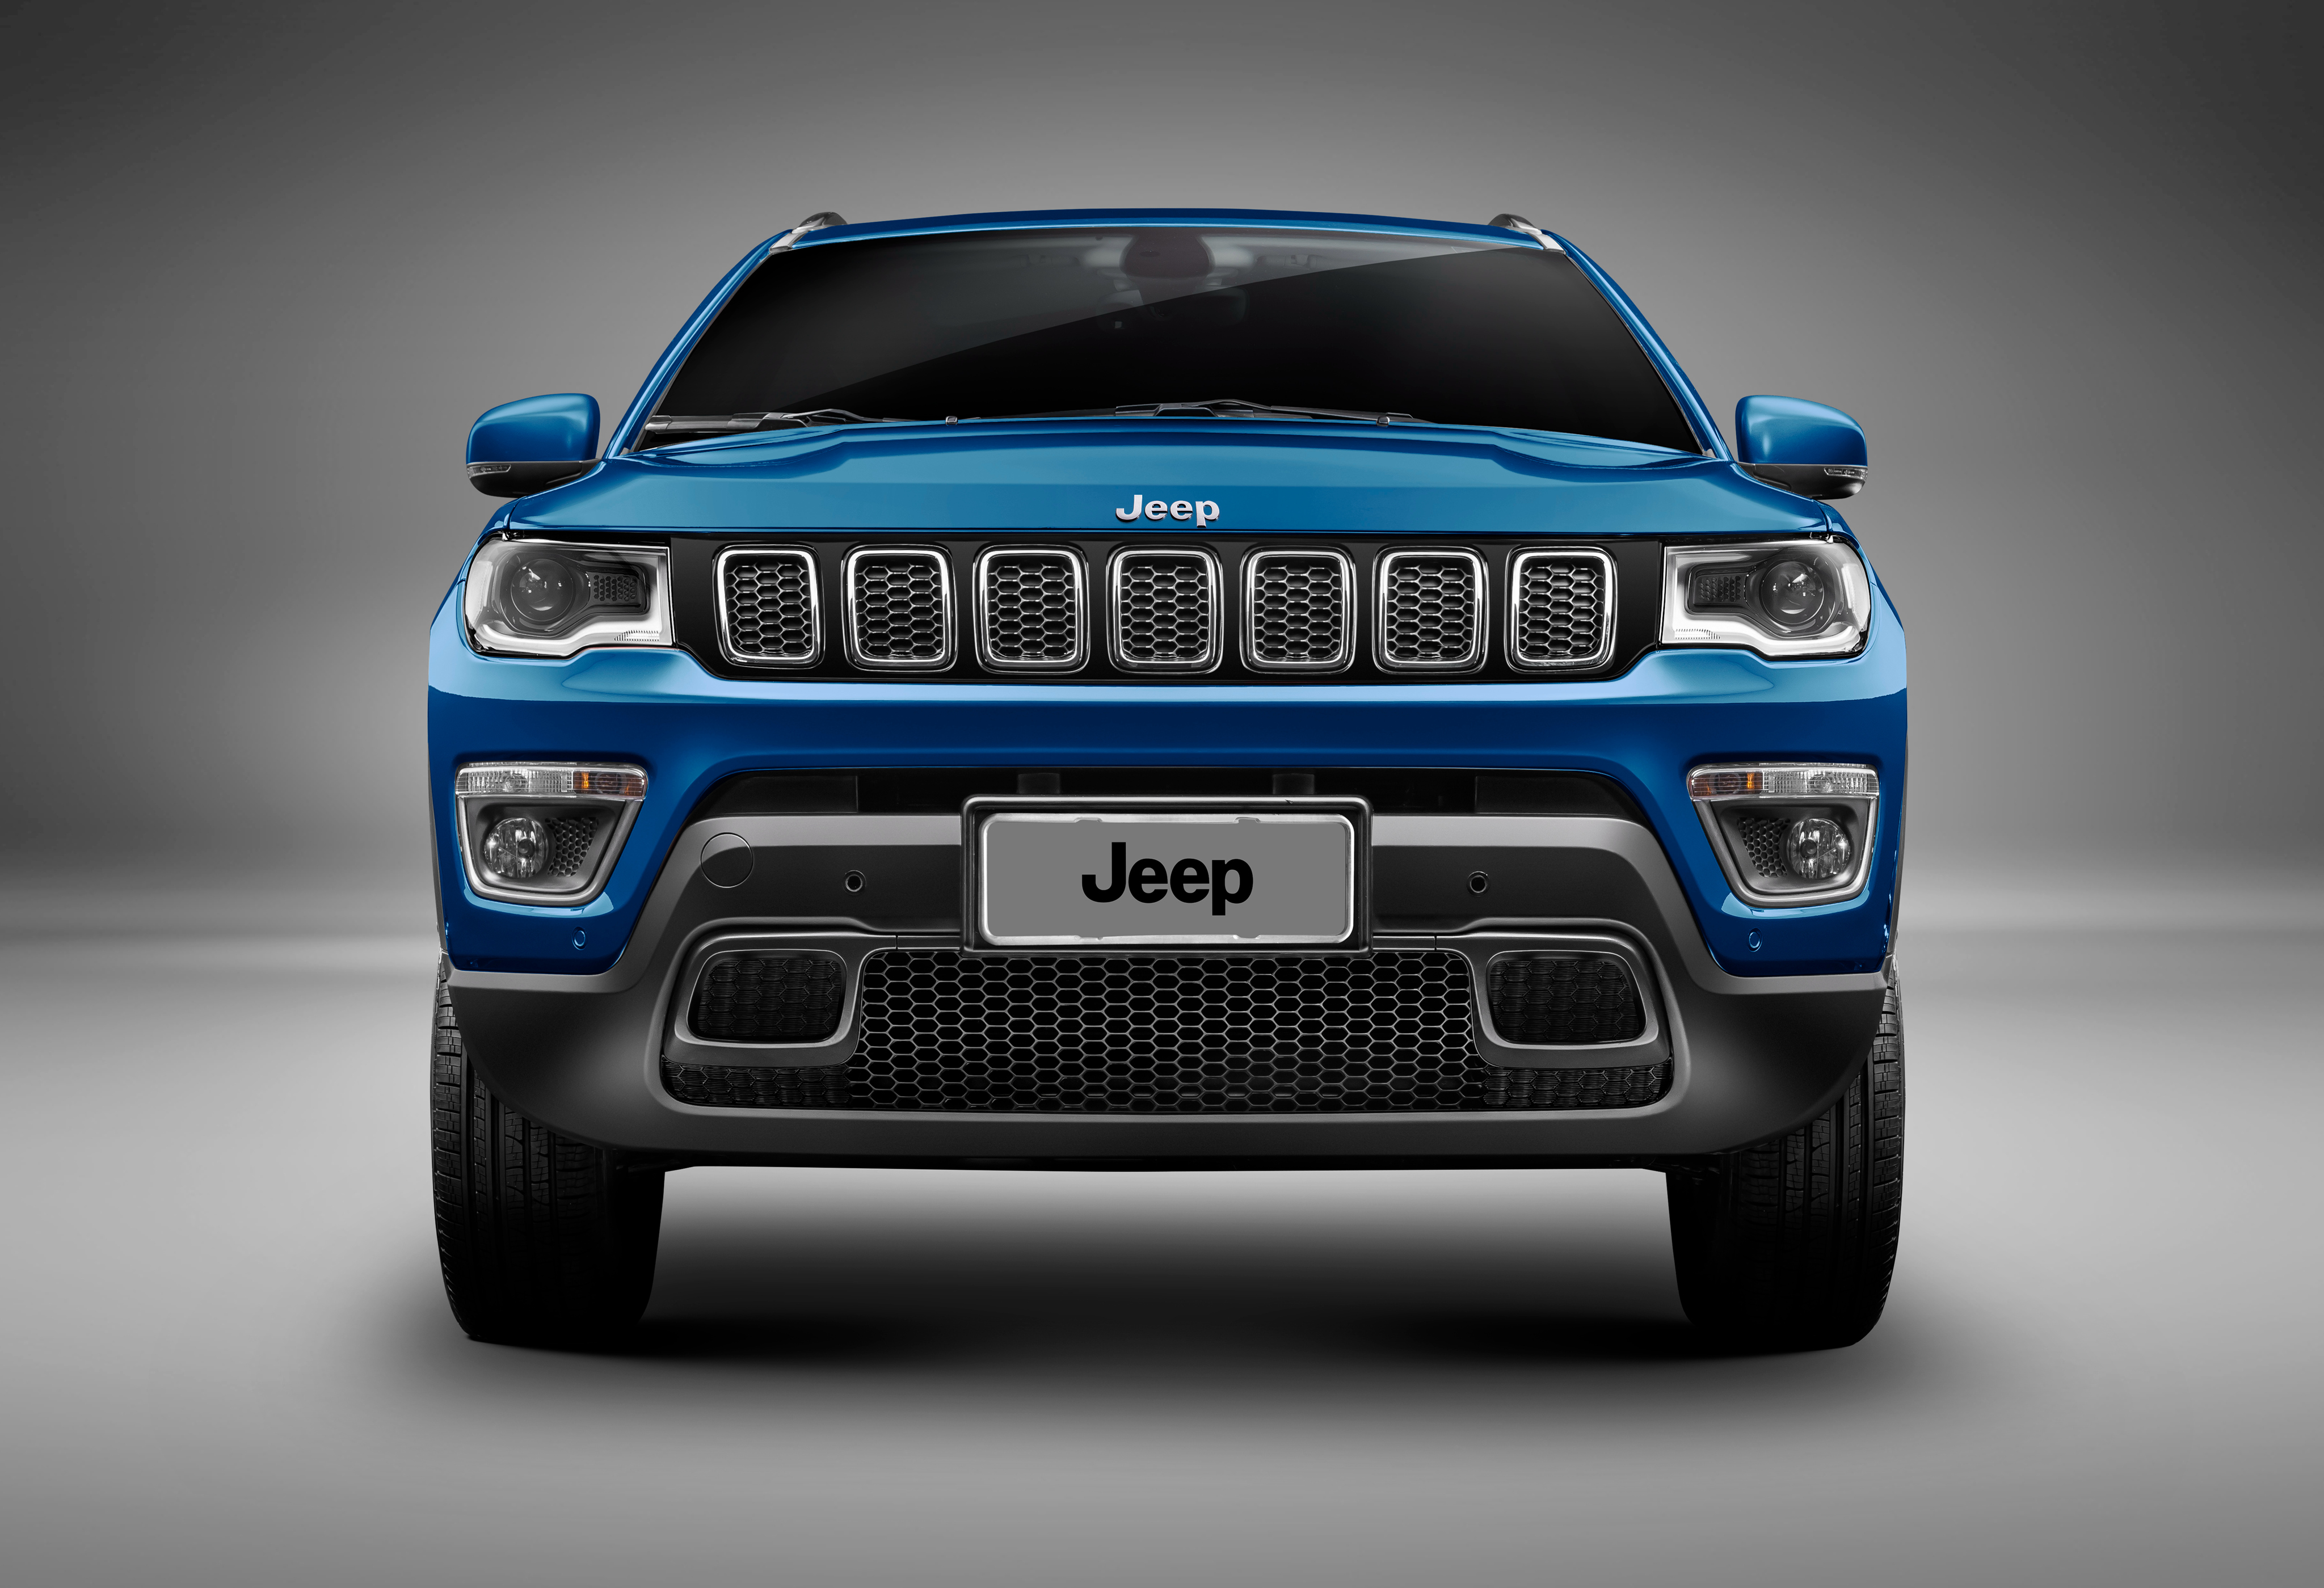 Jeep Compass exterior specifications